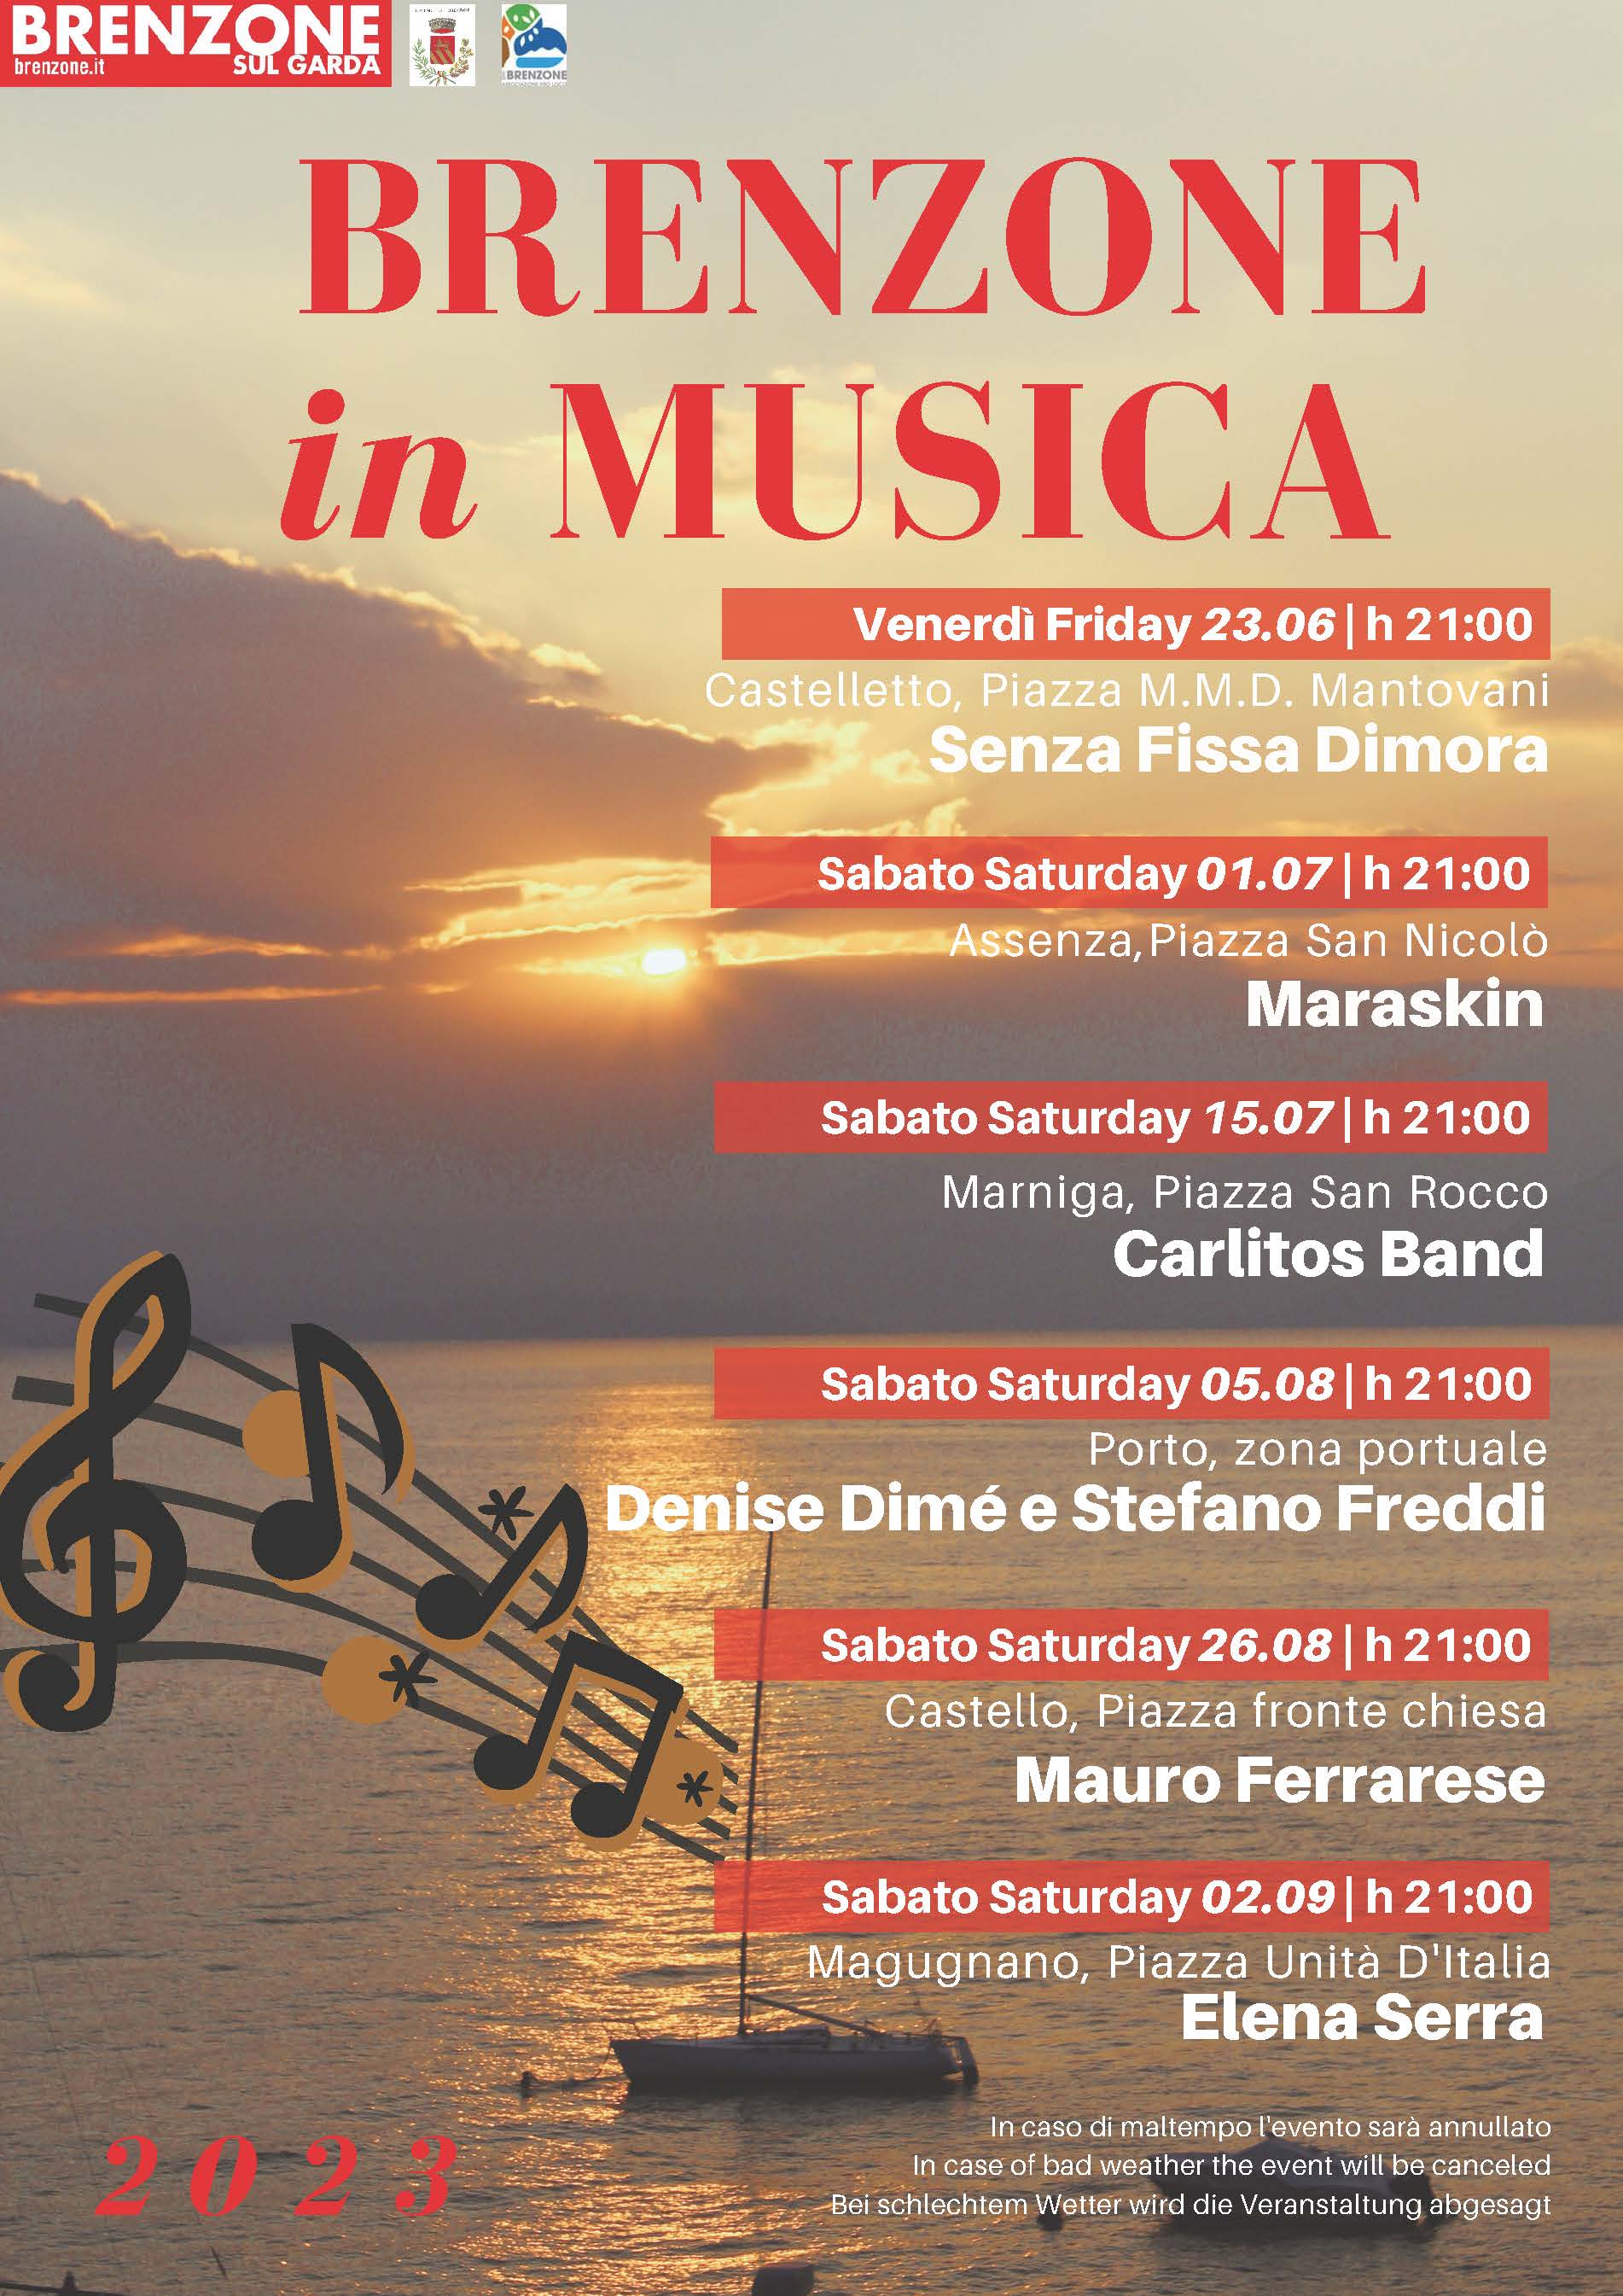 Live music evenings in Brenzone